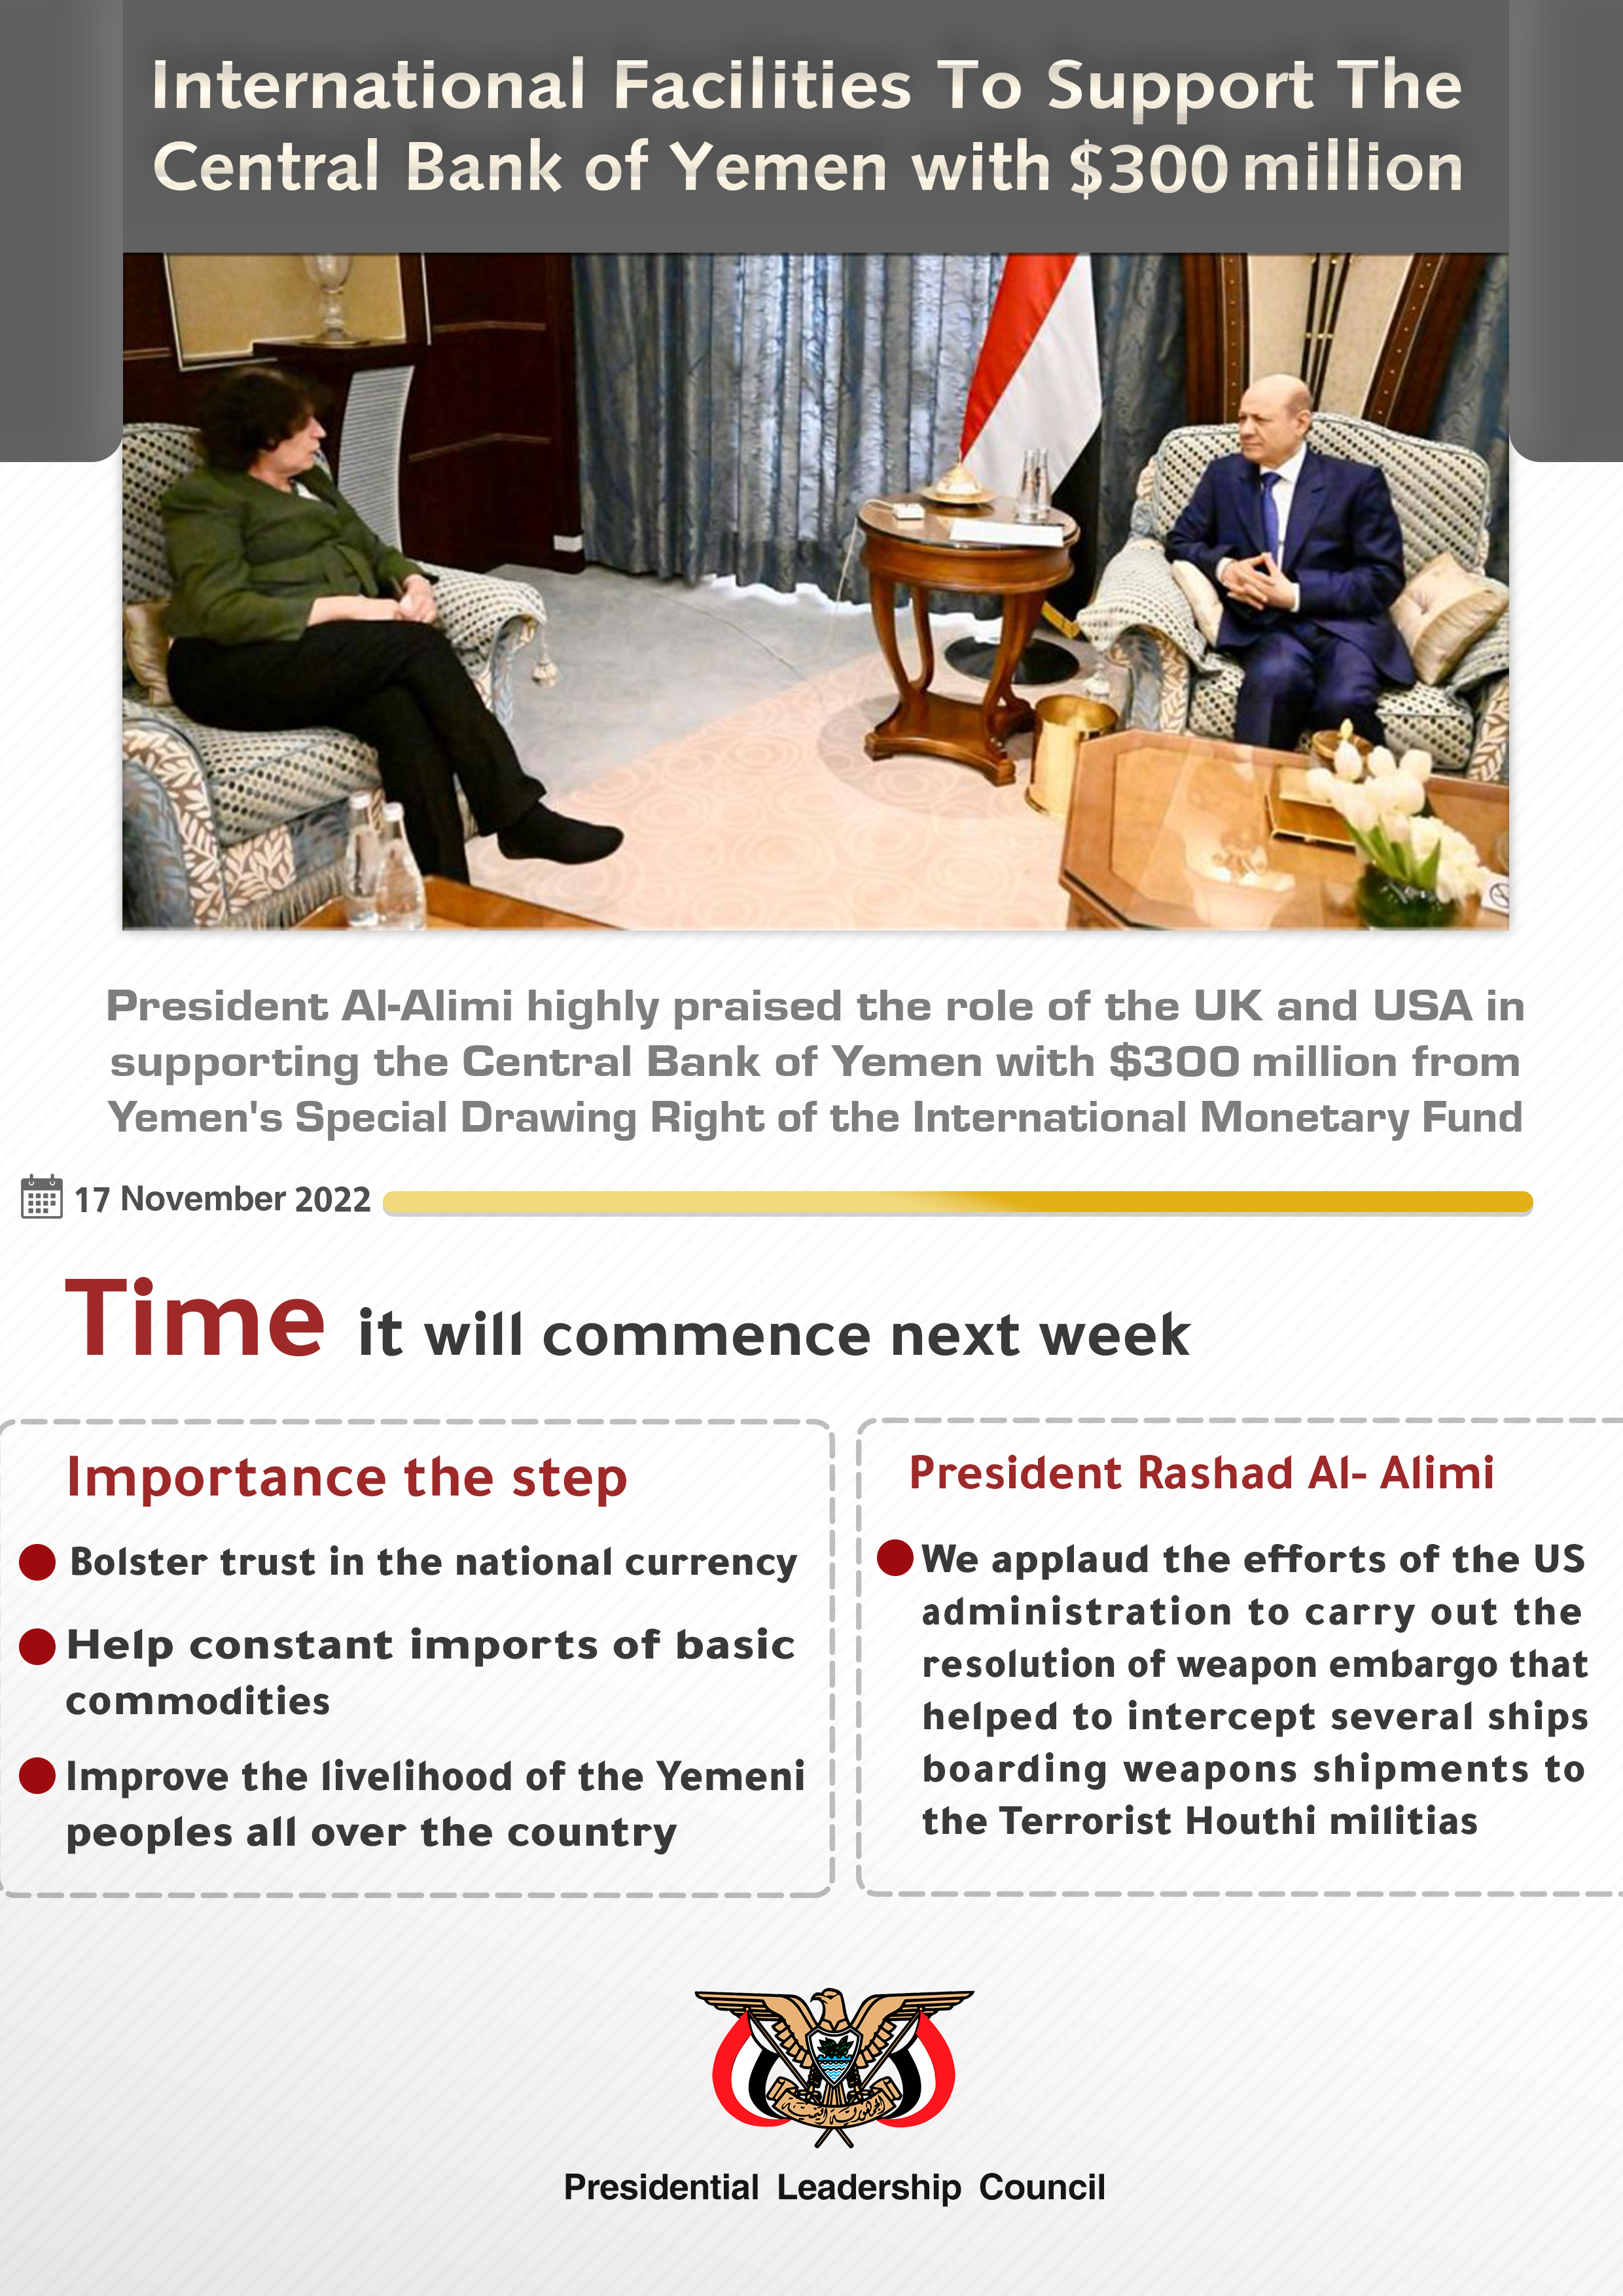 International Facilities To Support The Central Bank of Yemen with $300 million